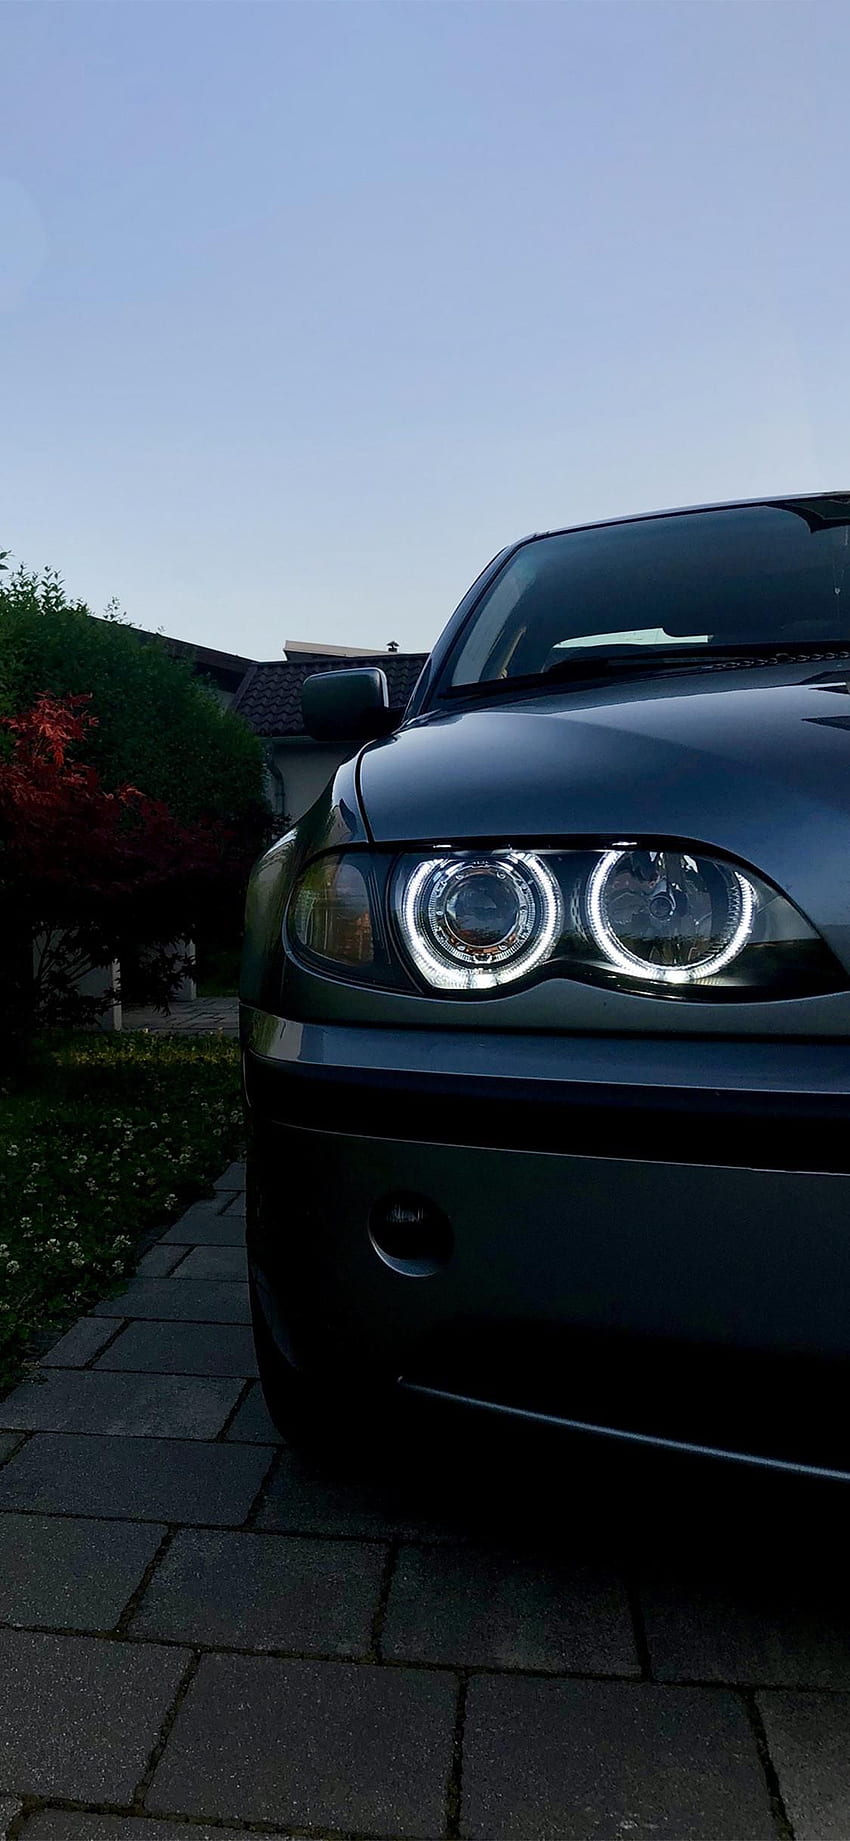 https://e0.pxfuel.com/wallpapers/622/200/desktop-wallpaper-just-a-phone-that-i-shot-of-my-e46-got-the-angel-eyes-fitted-today-d-bmw-bmw-angel-eyes-angel-eyes-bmw-e46-touring.jpg